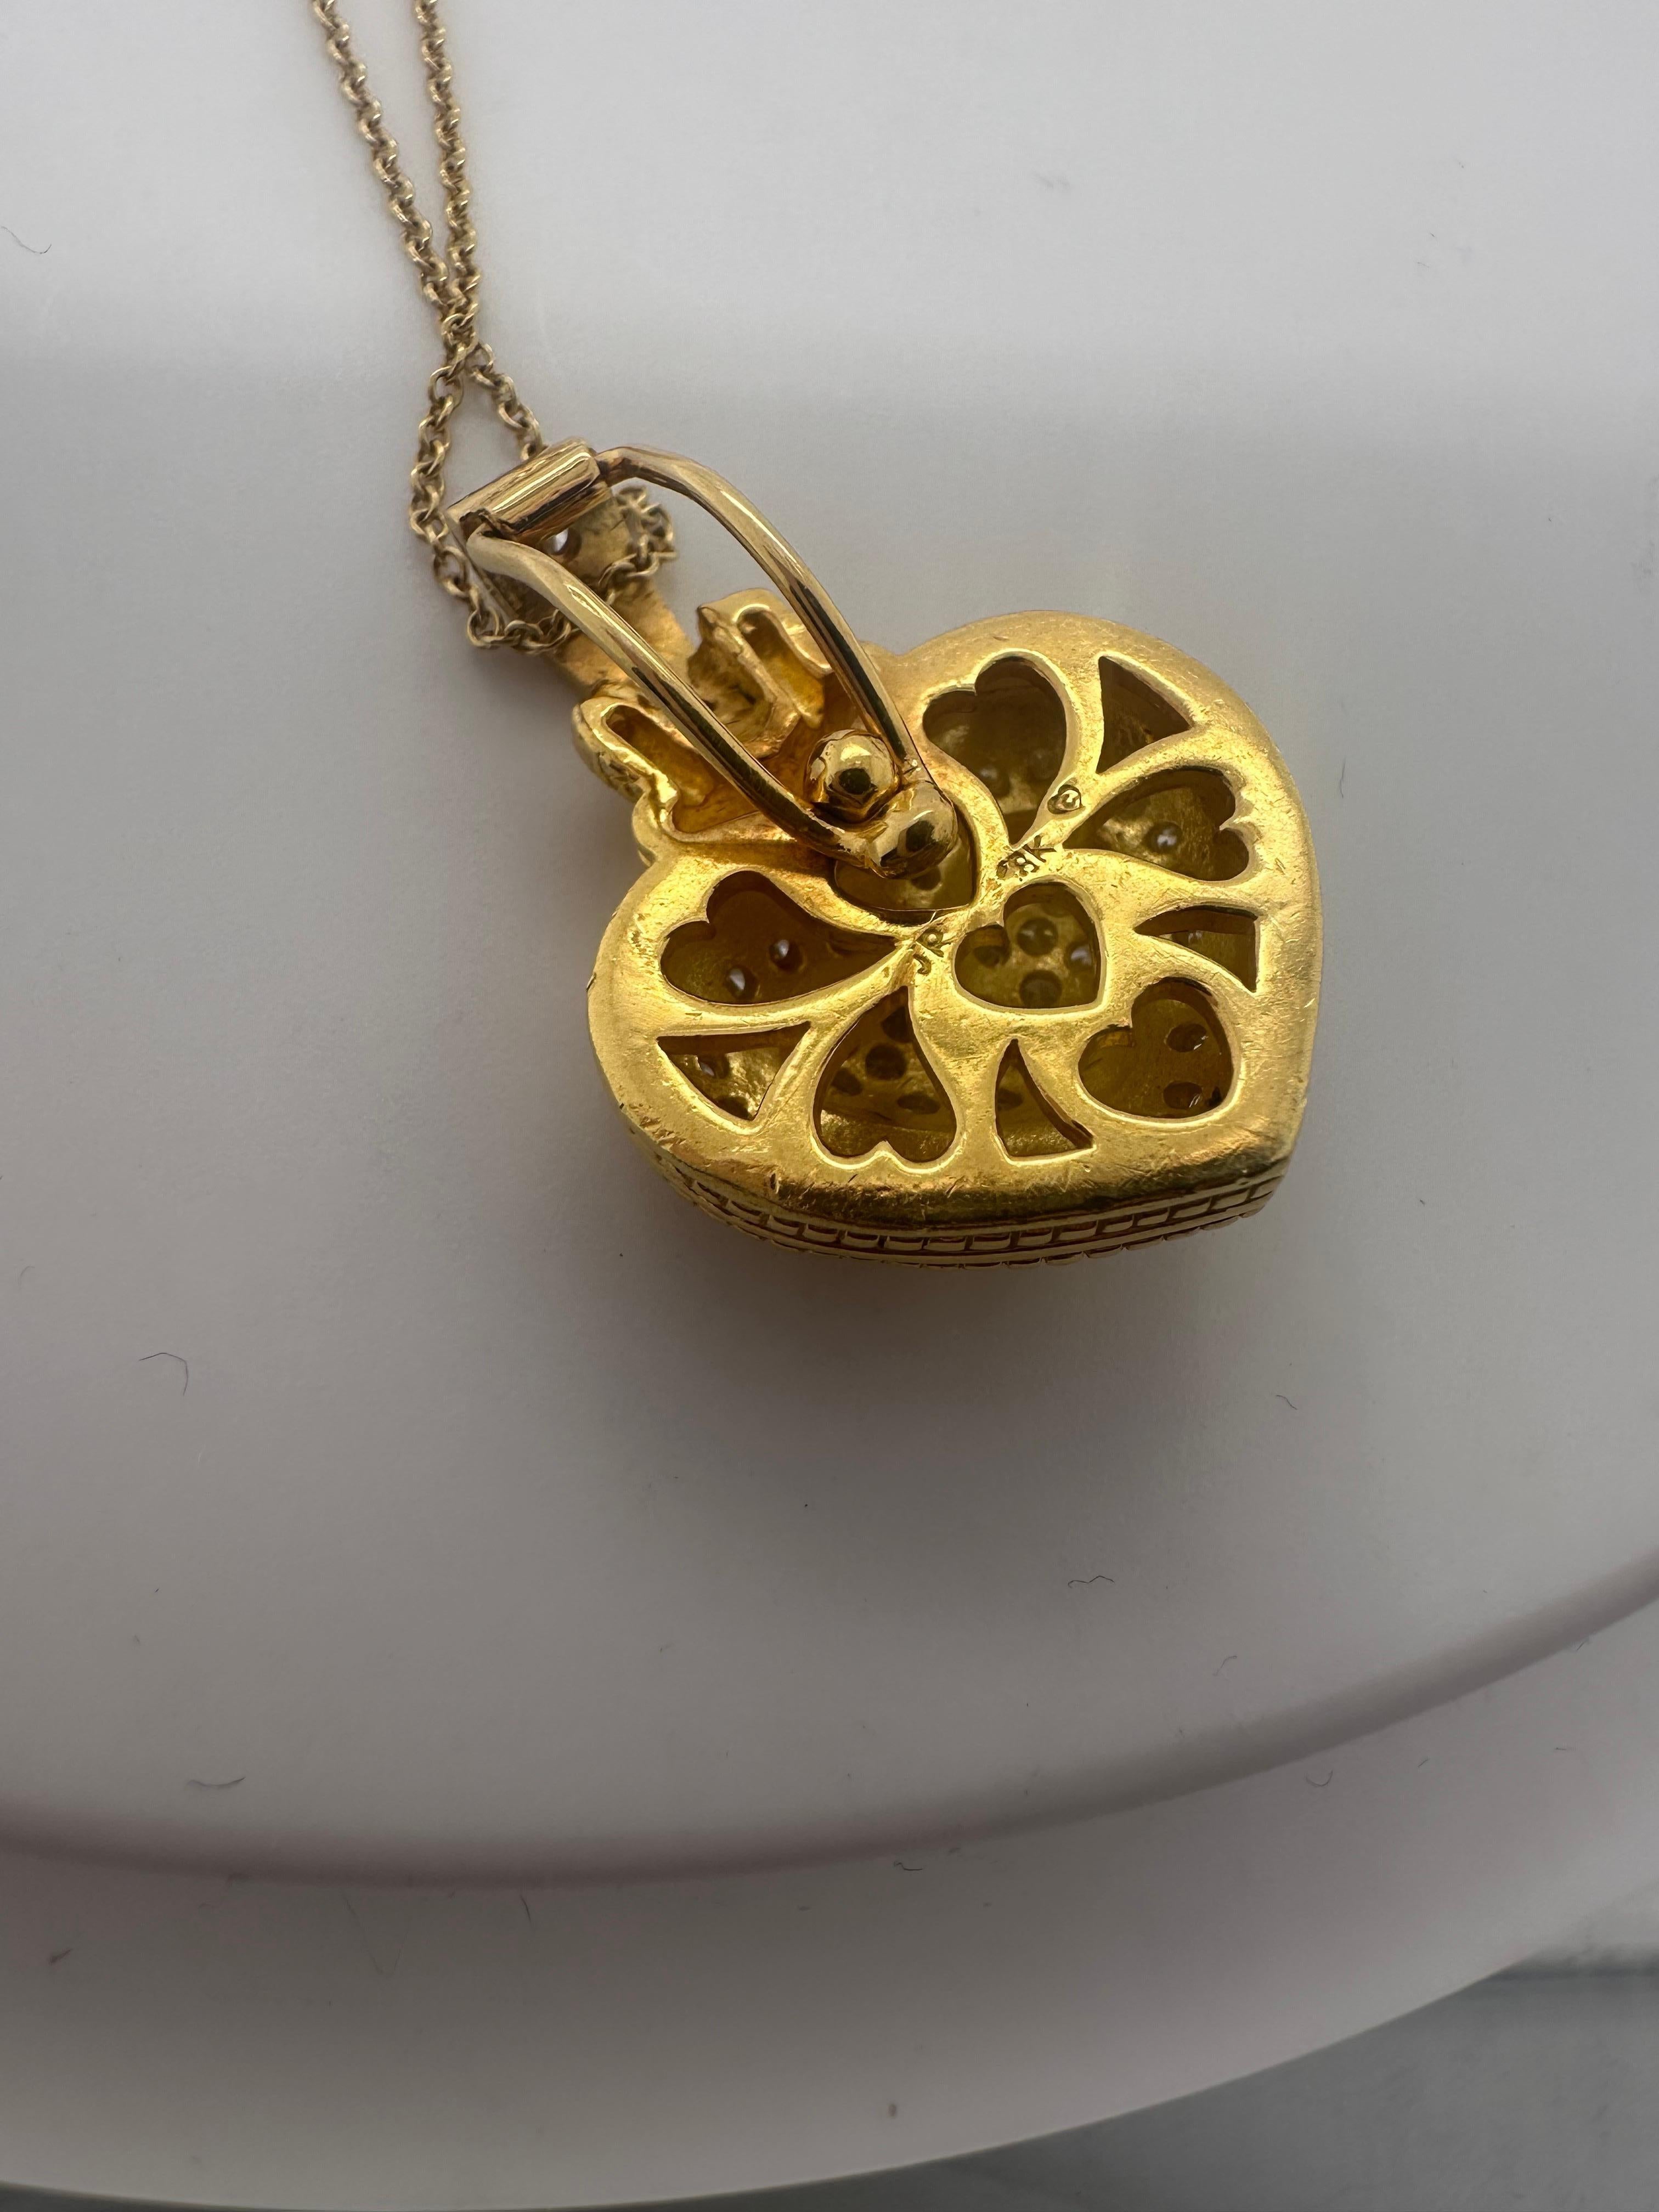 Sweet heart pendant made in 18KT yellow gold with natural diamonds, chain is 18